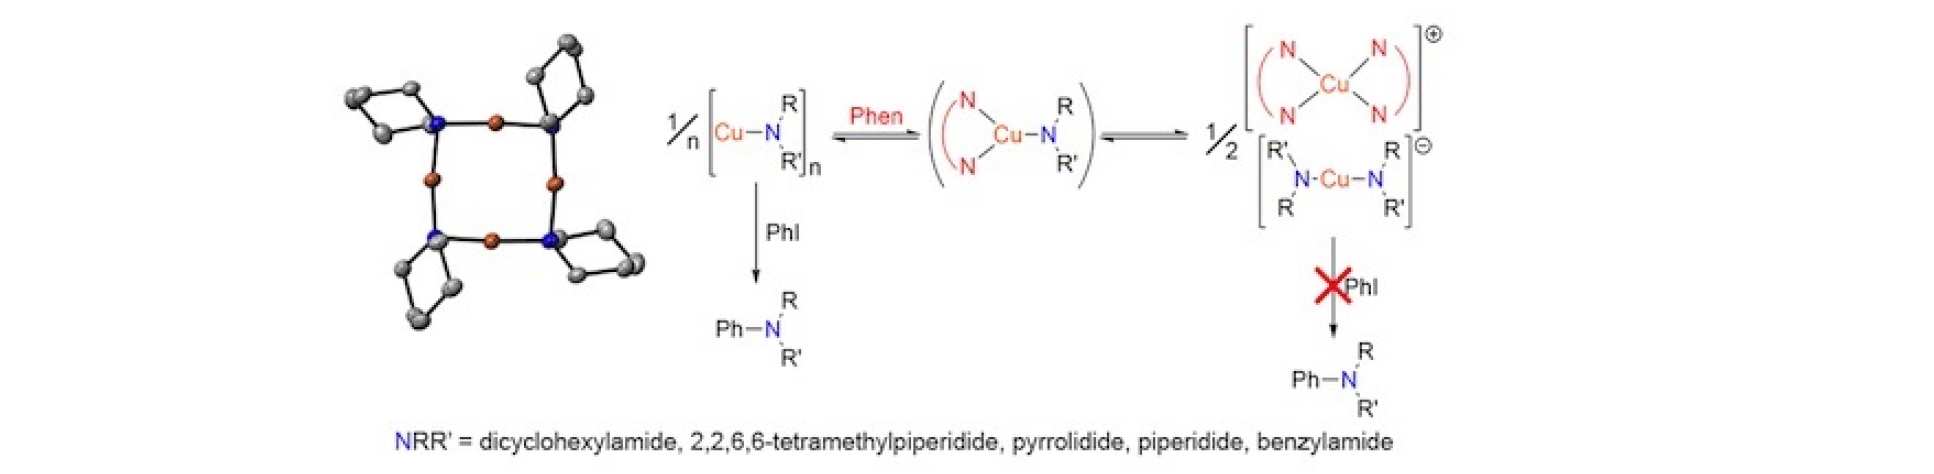 Summary scheme for paper: Synthesis, Characterisation and Reactivity of Copper(I) Amide Complexes and Studies on Their Role in the Modified Ullmann Amination Reaction